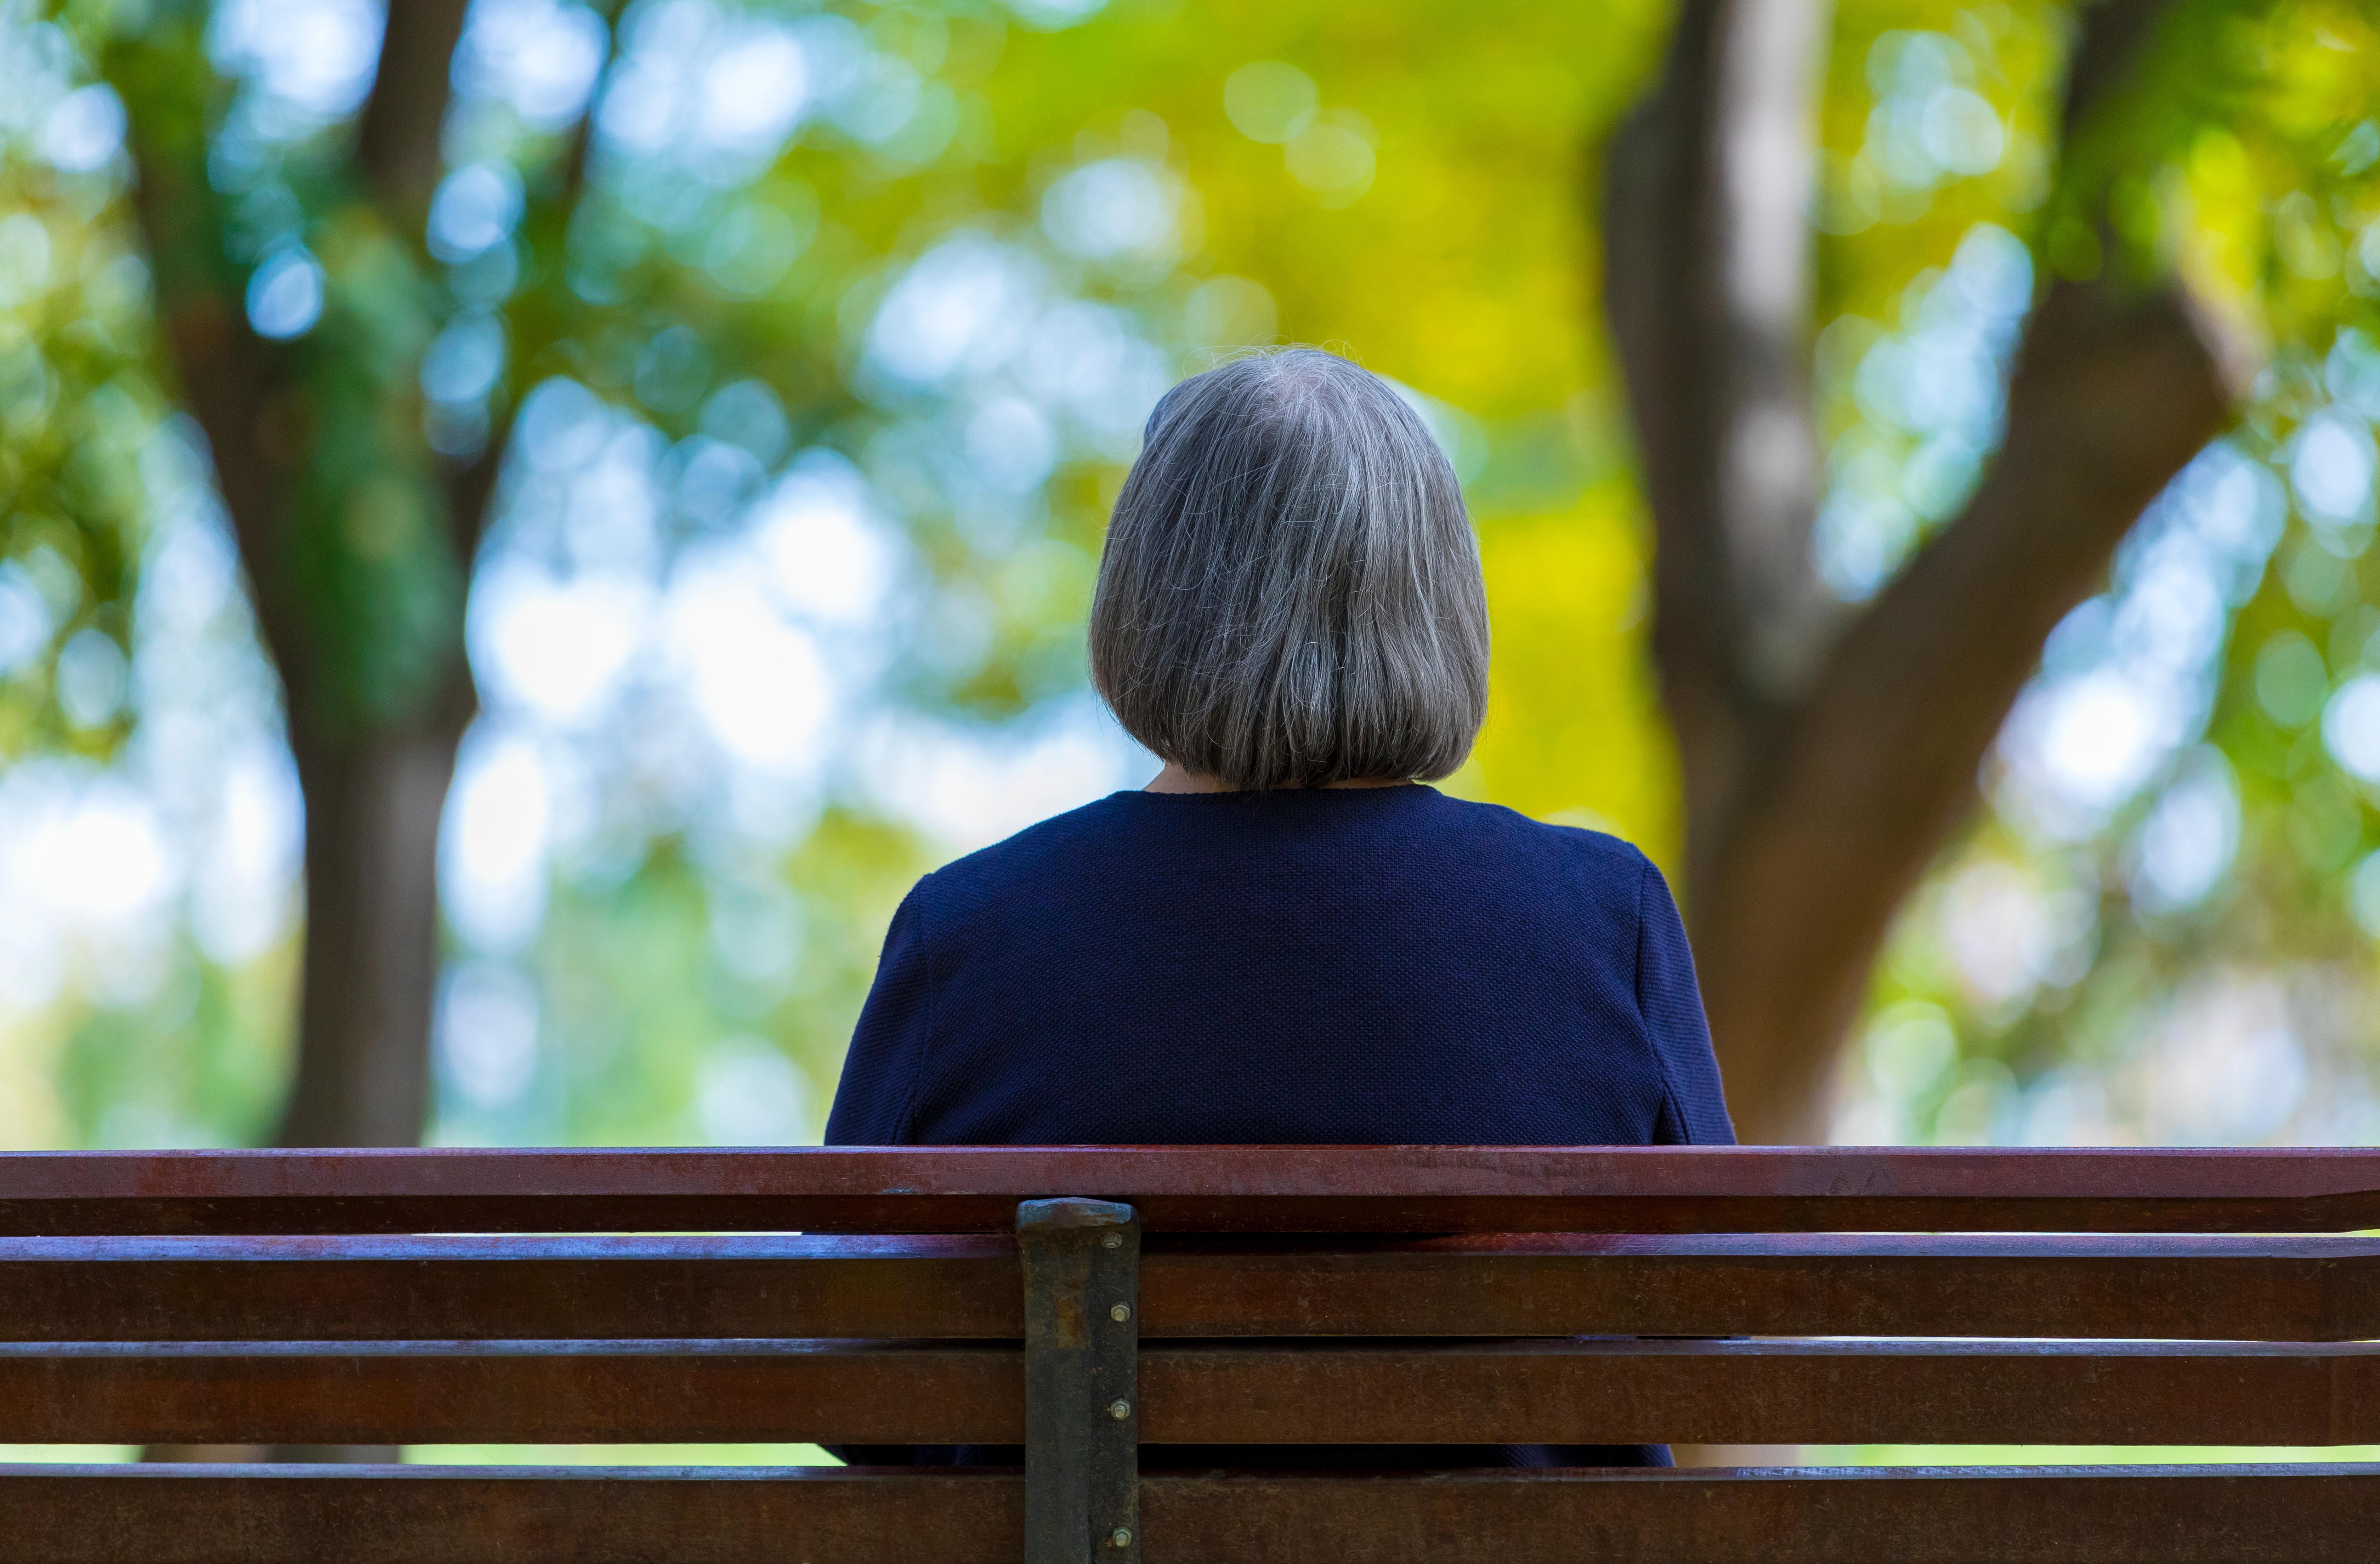 A senior woman sitting on a bench in a park | Source: Shutterstock